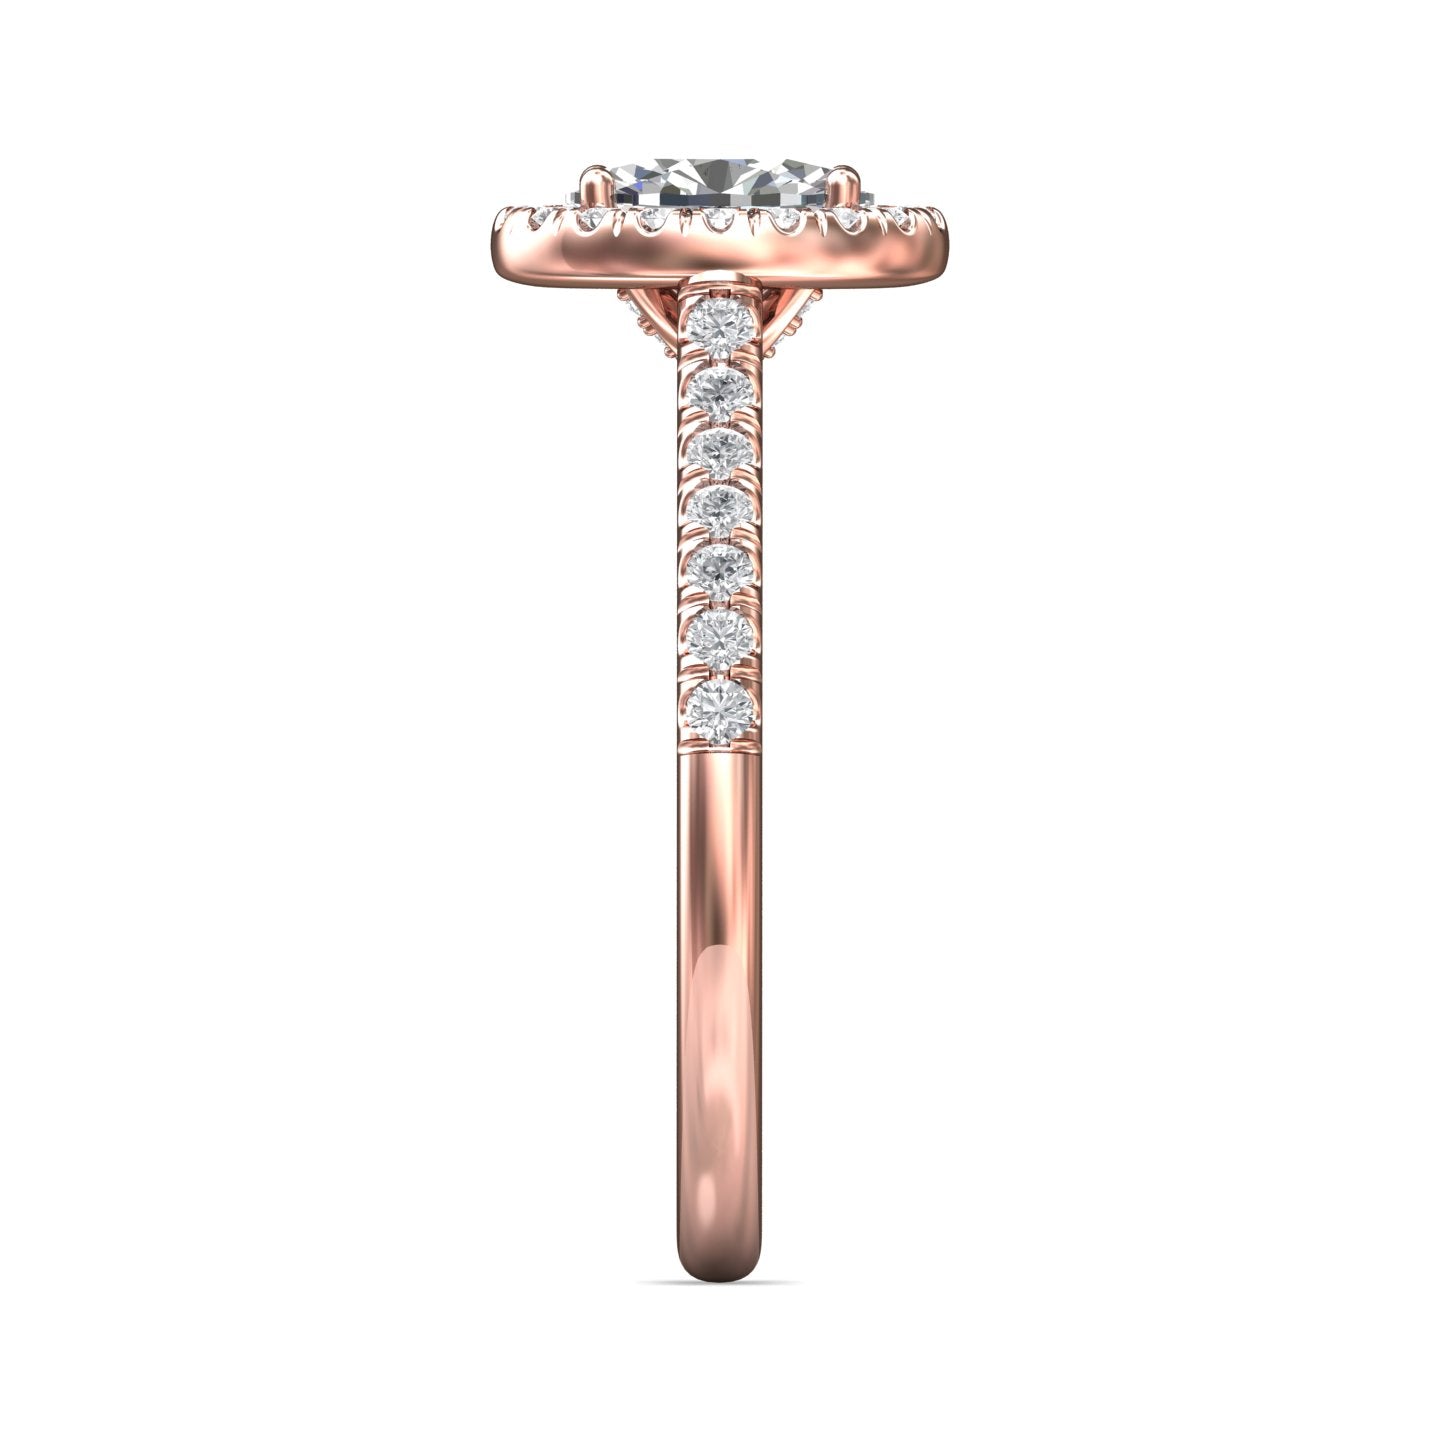 18K Rose Gold Oval Halo Micro-Pave Engagement Ring